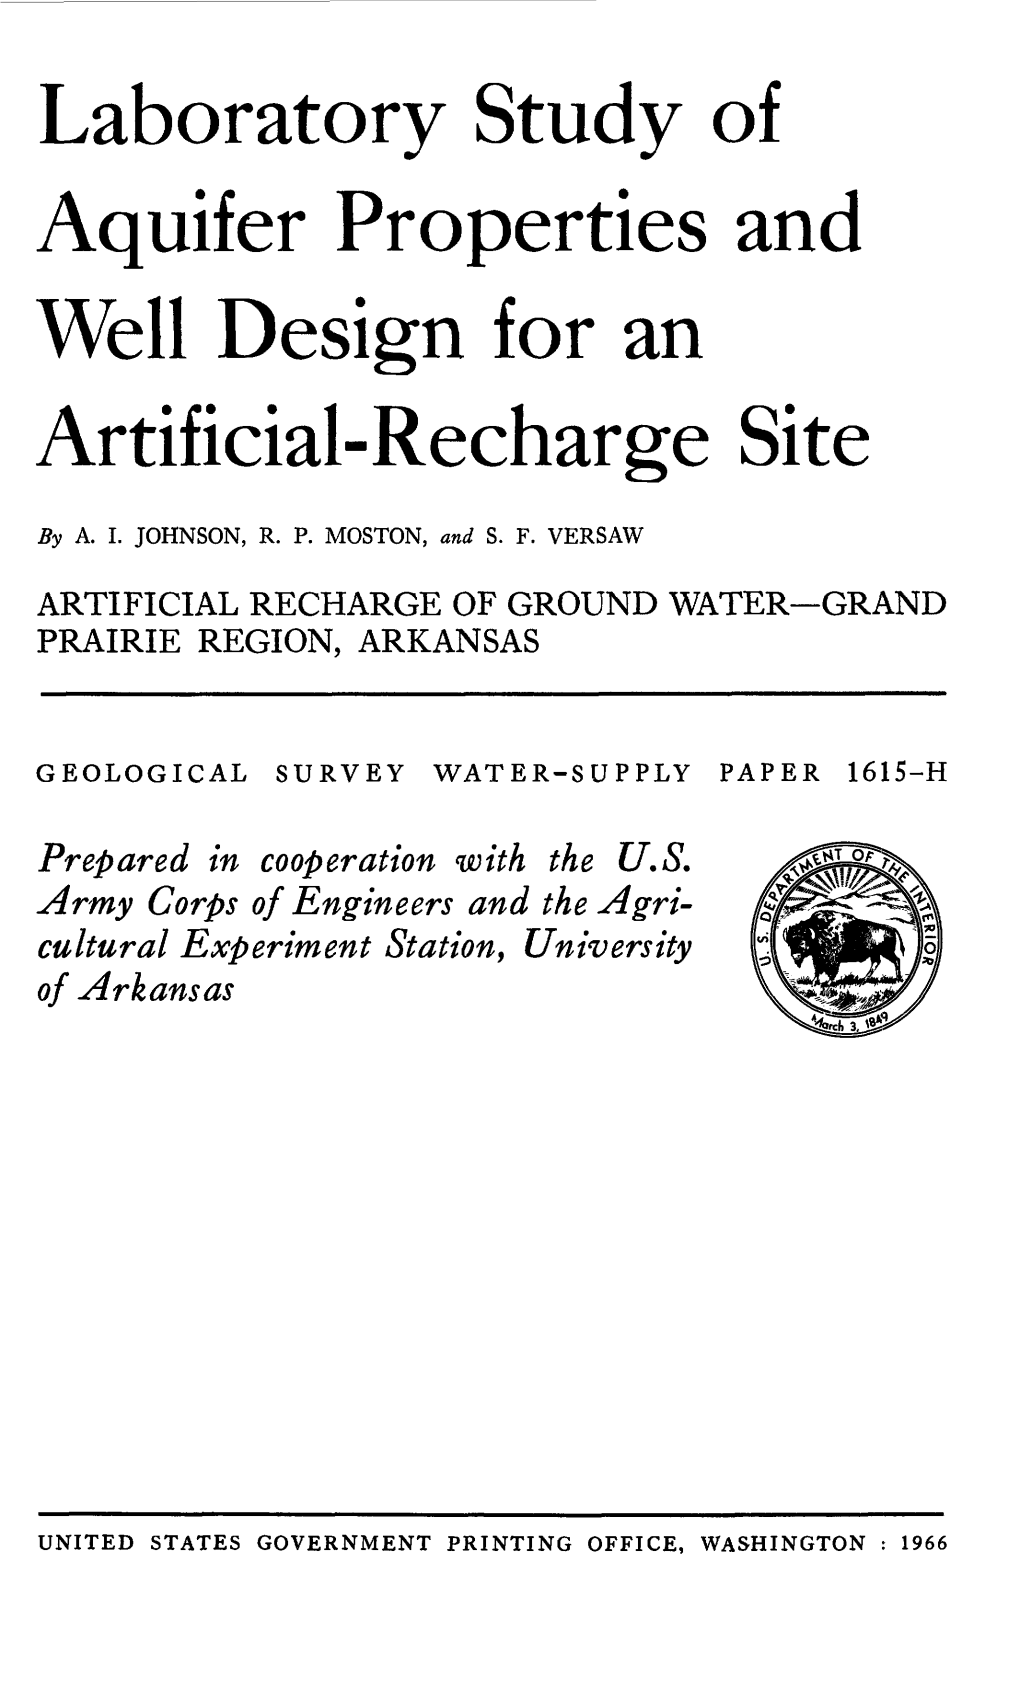 Laboratory Study of Aquifer Properties and Well Design for an Artificial-Recharge Site